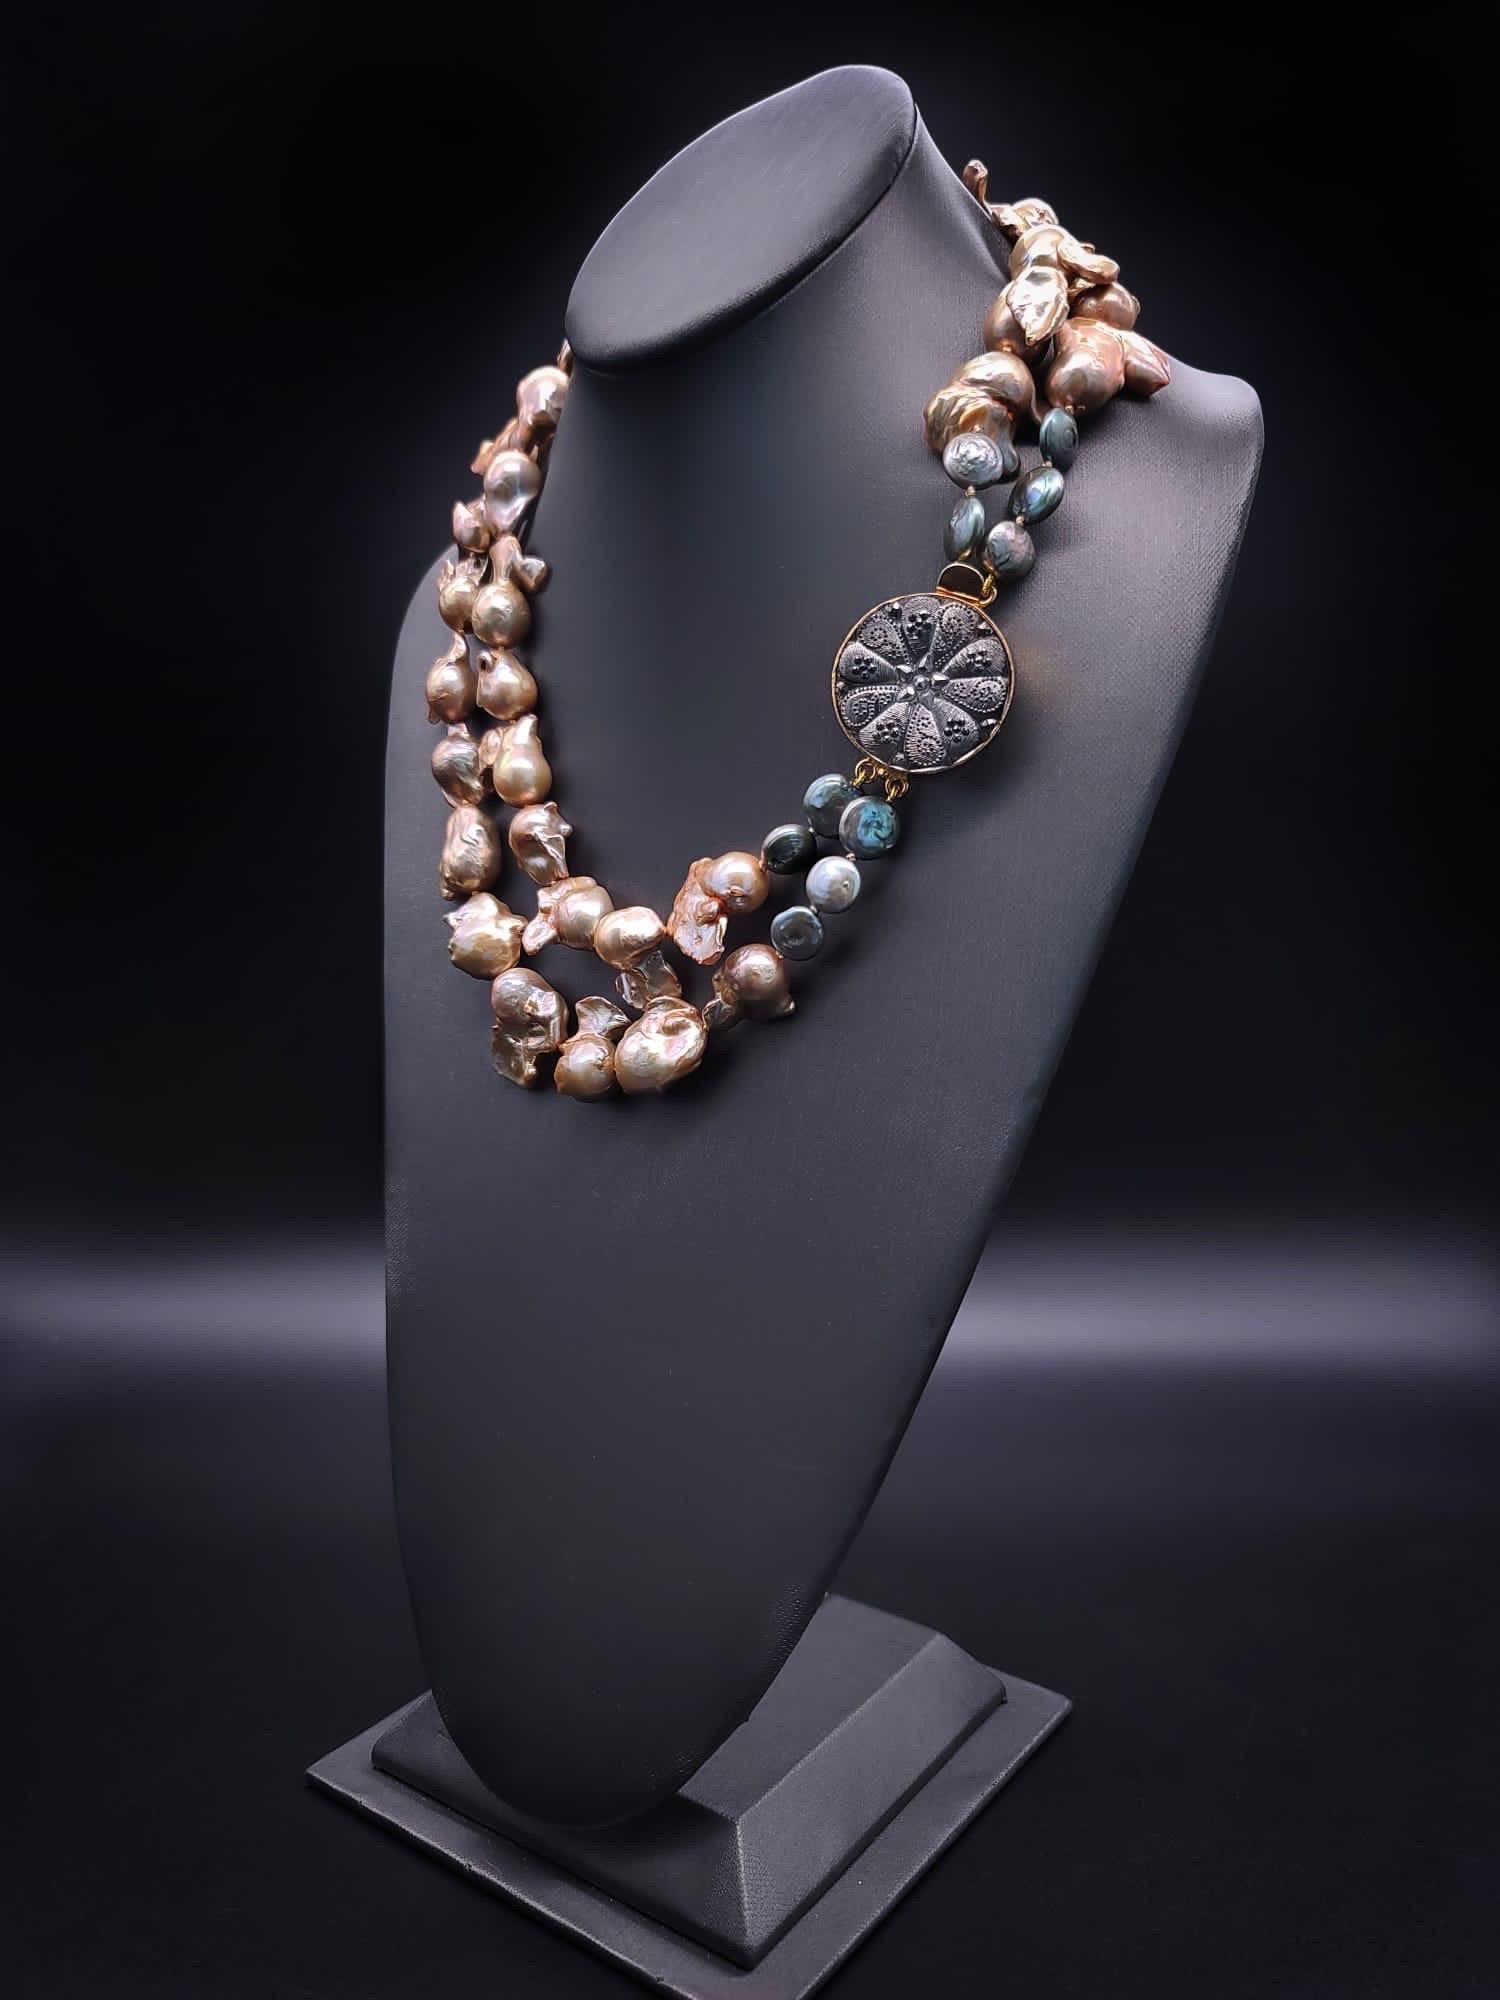 Unparalleled Glamour:

Prepare to be captivated by the resounding allure emanating from our extraordinary 2-strand Rose Gold Baroque Pearl necklace. With each baroque Pearl a masterpiece in its own right, this necklace resonates with a level of